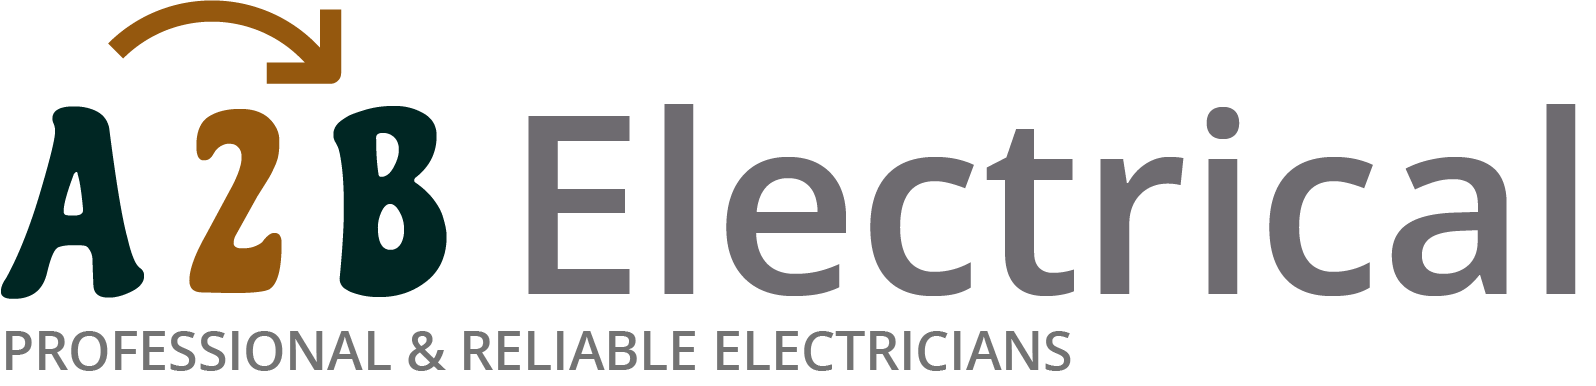 If you have electrical wiring problems in Kilmarnock, we can provide an electrician to have a look for you. 